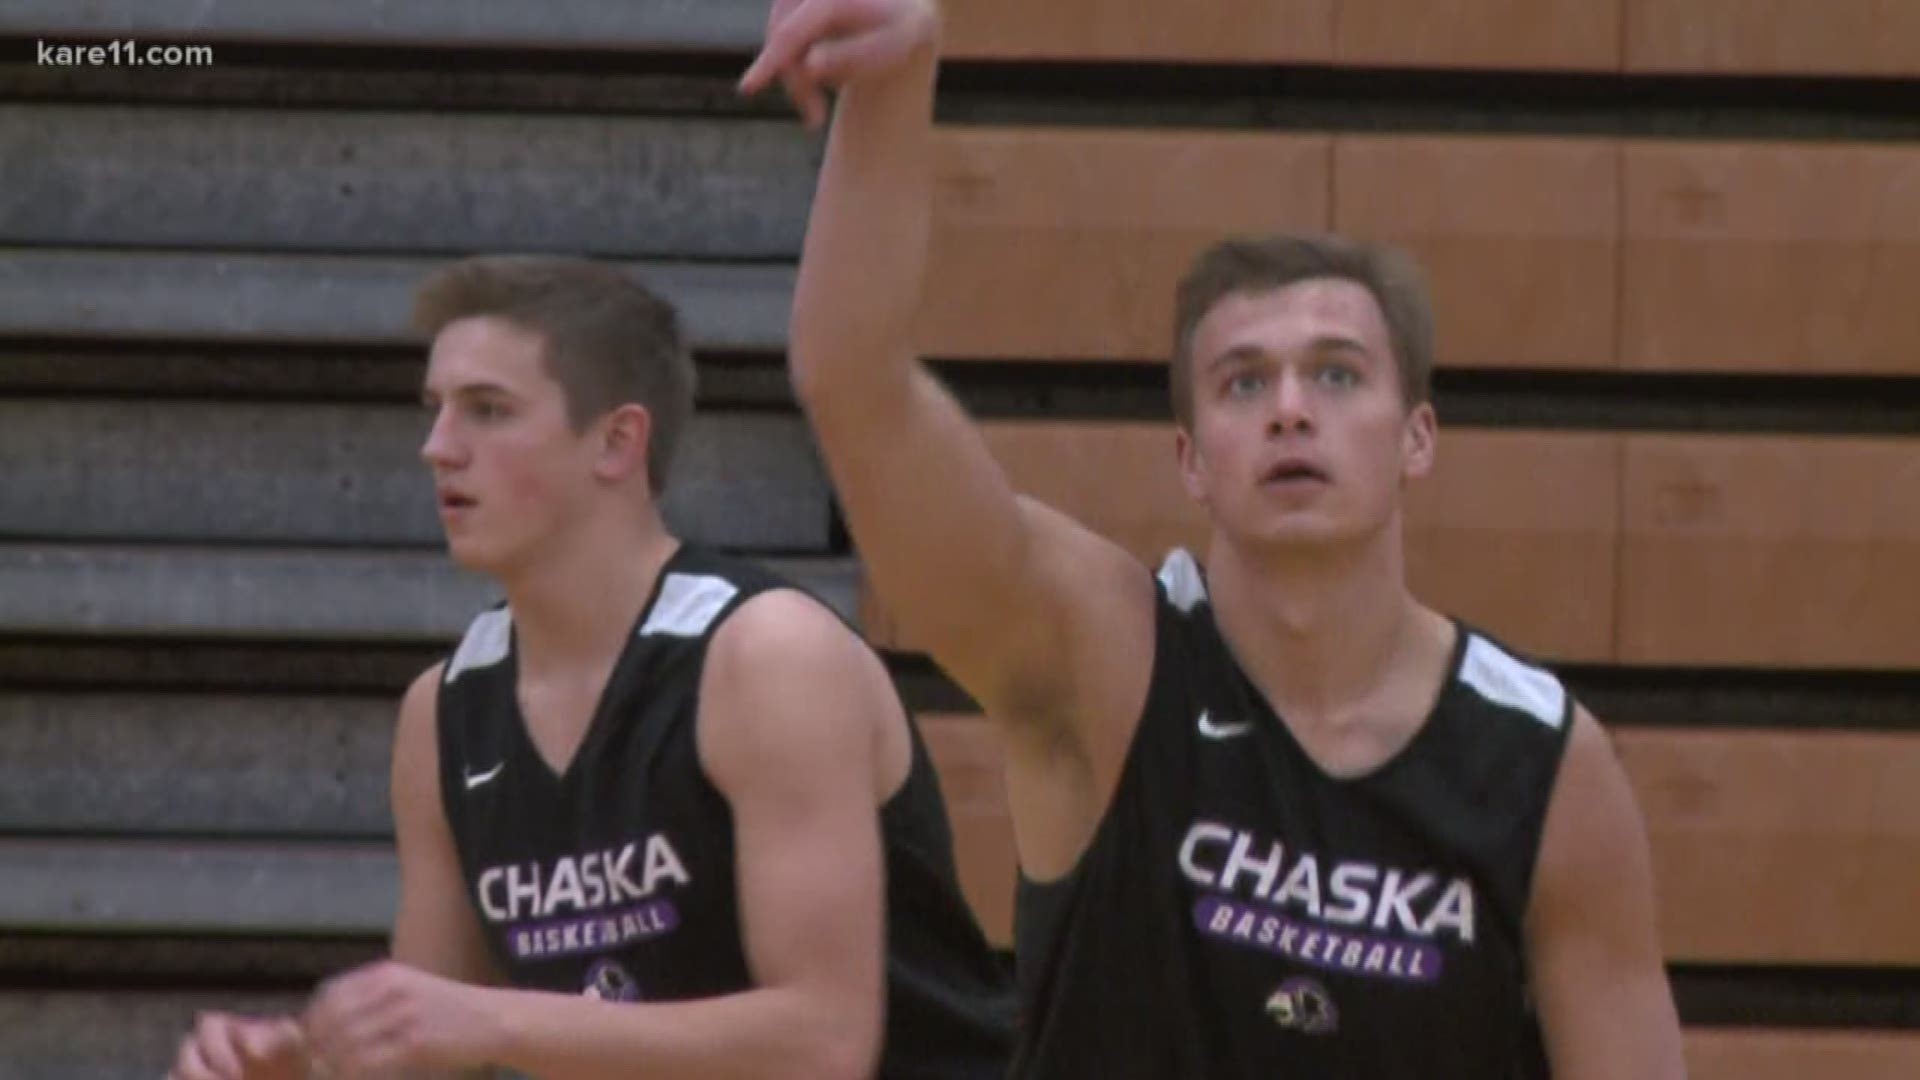 Senior captain Cole Nicholson scored 51 points in Chaska’s 82-69 win over Robbinsdale Cooper shattering a record that had stood since 1956. https://kare11.tv/2BeeUMq